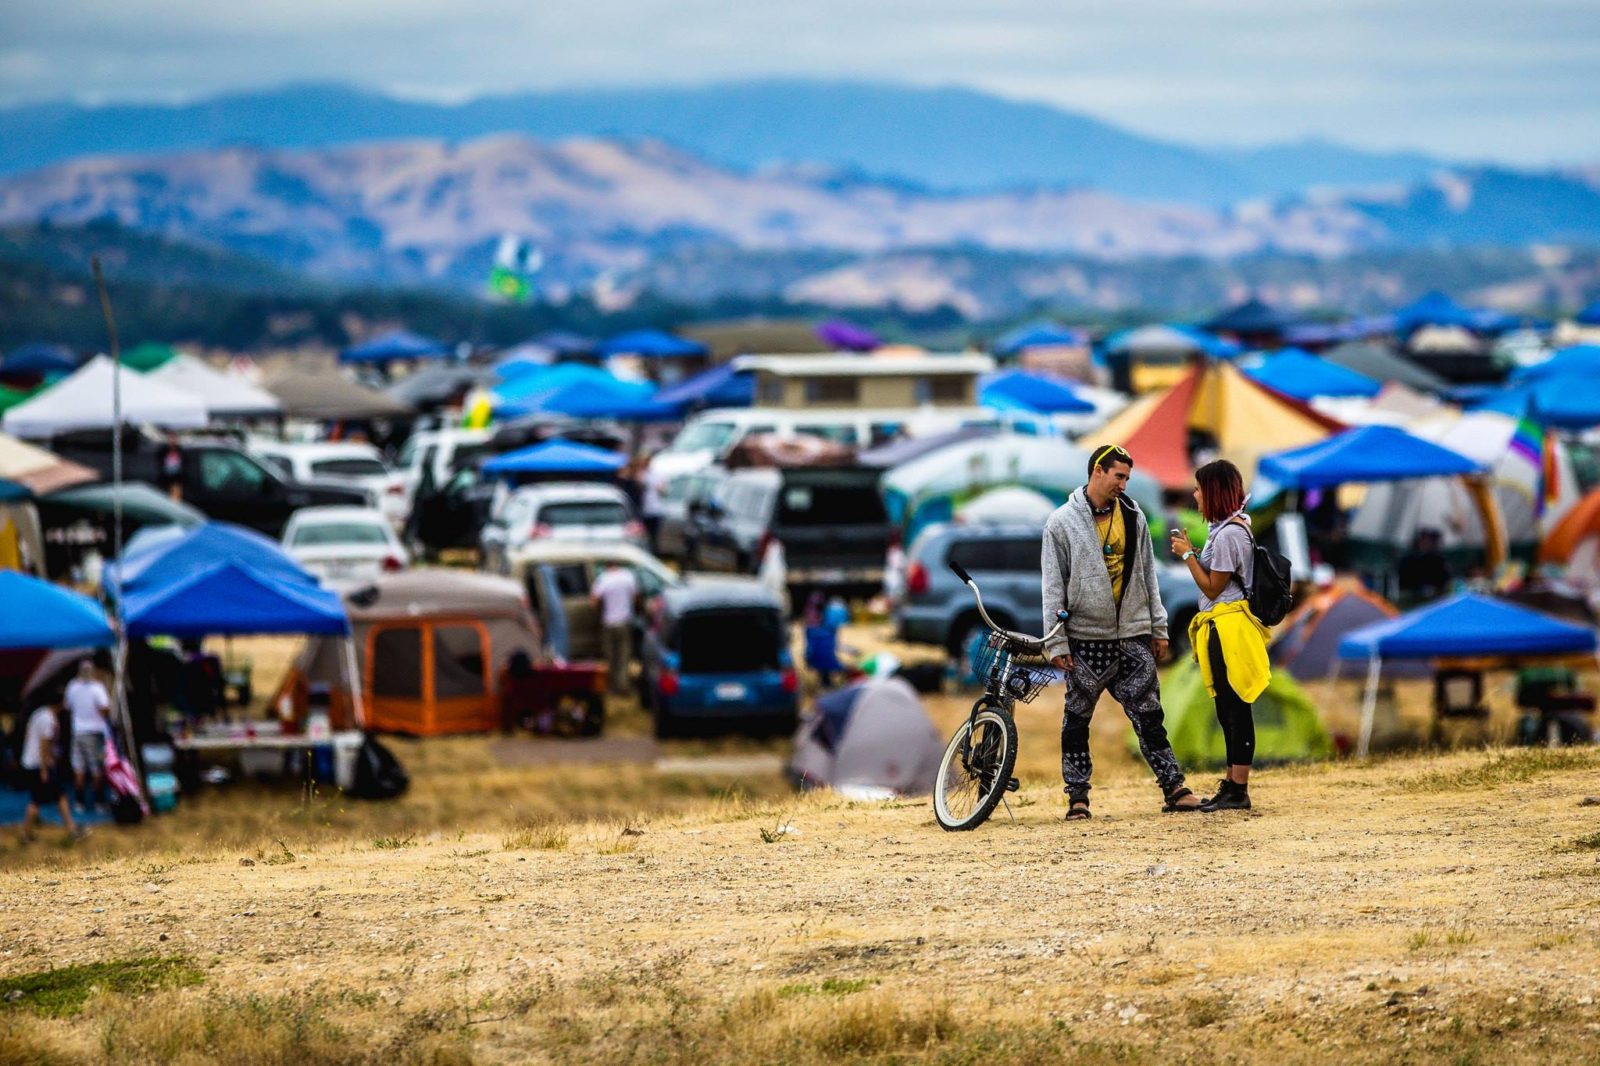 Camping At A Festival And What To Bring - The Festival Voice